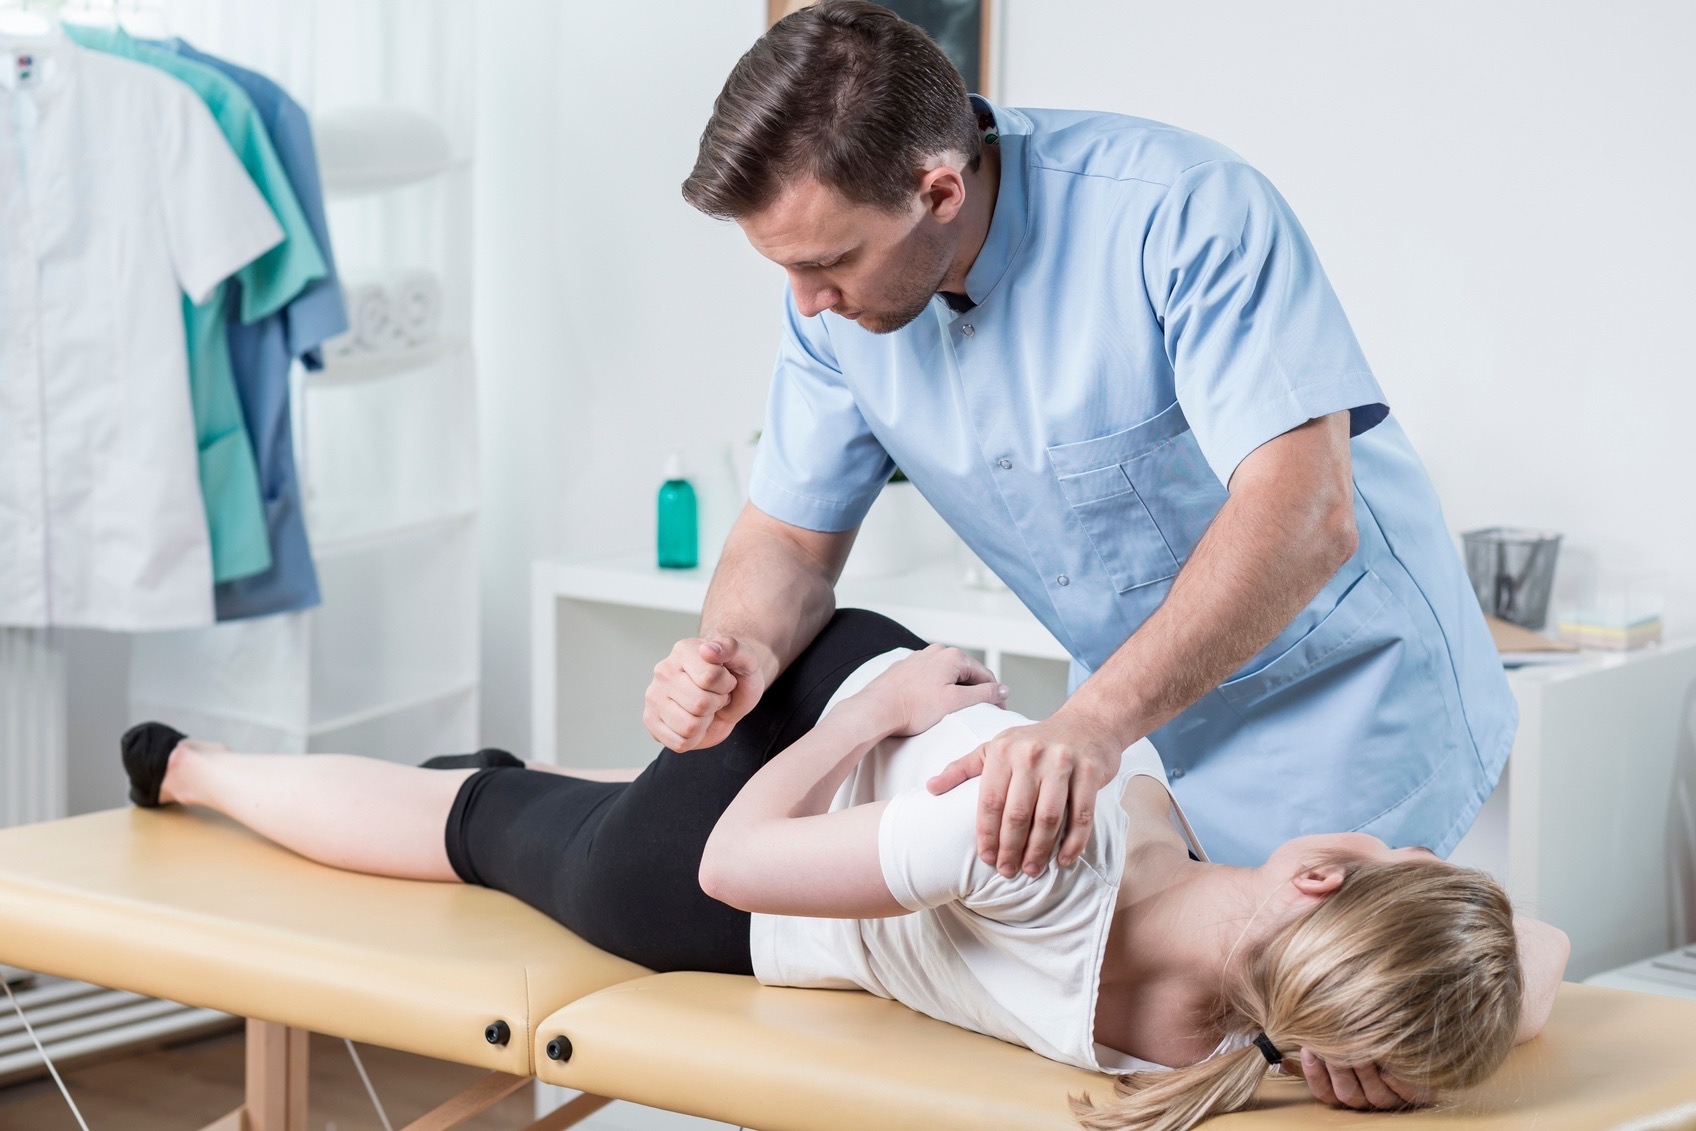 Spinal Adjustments | What They Are And How They're Performed